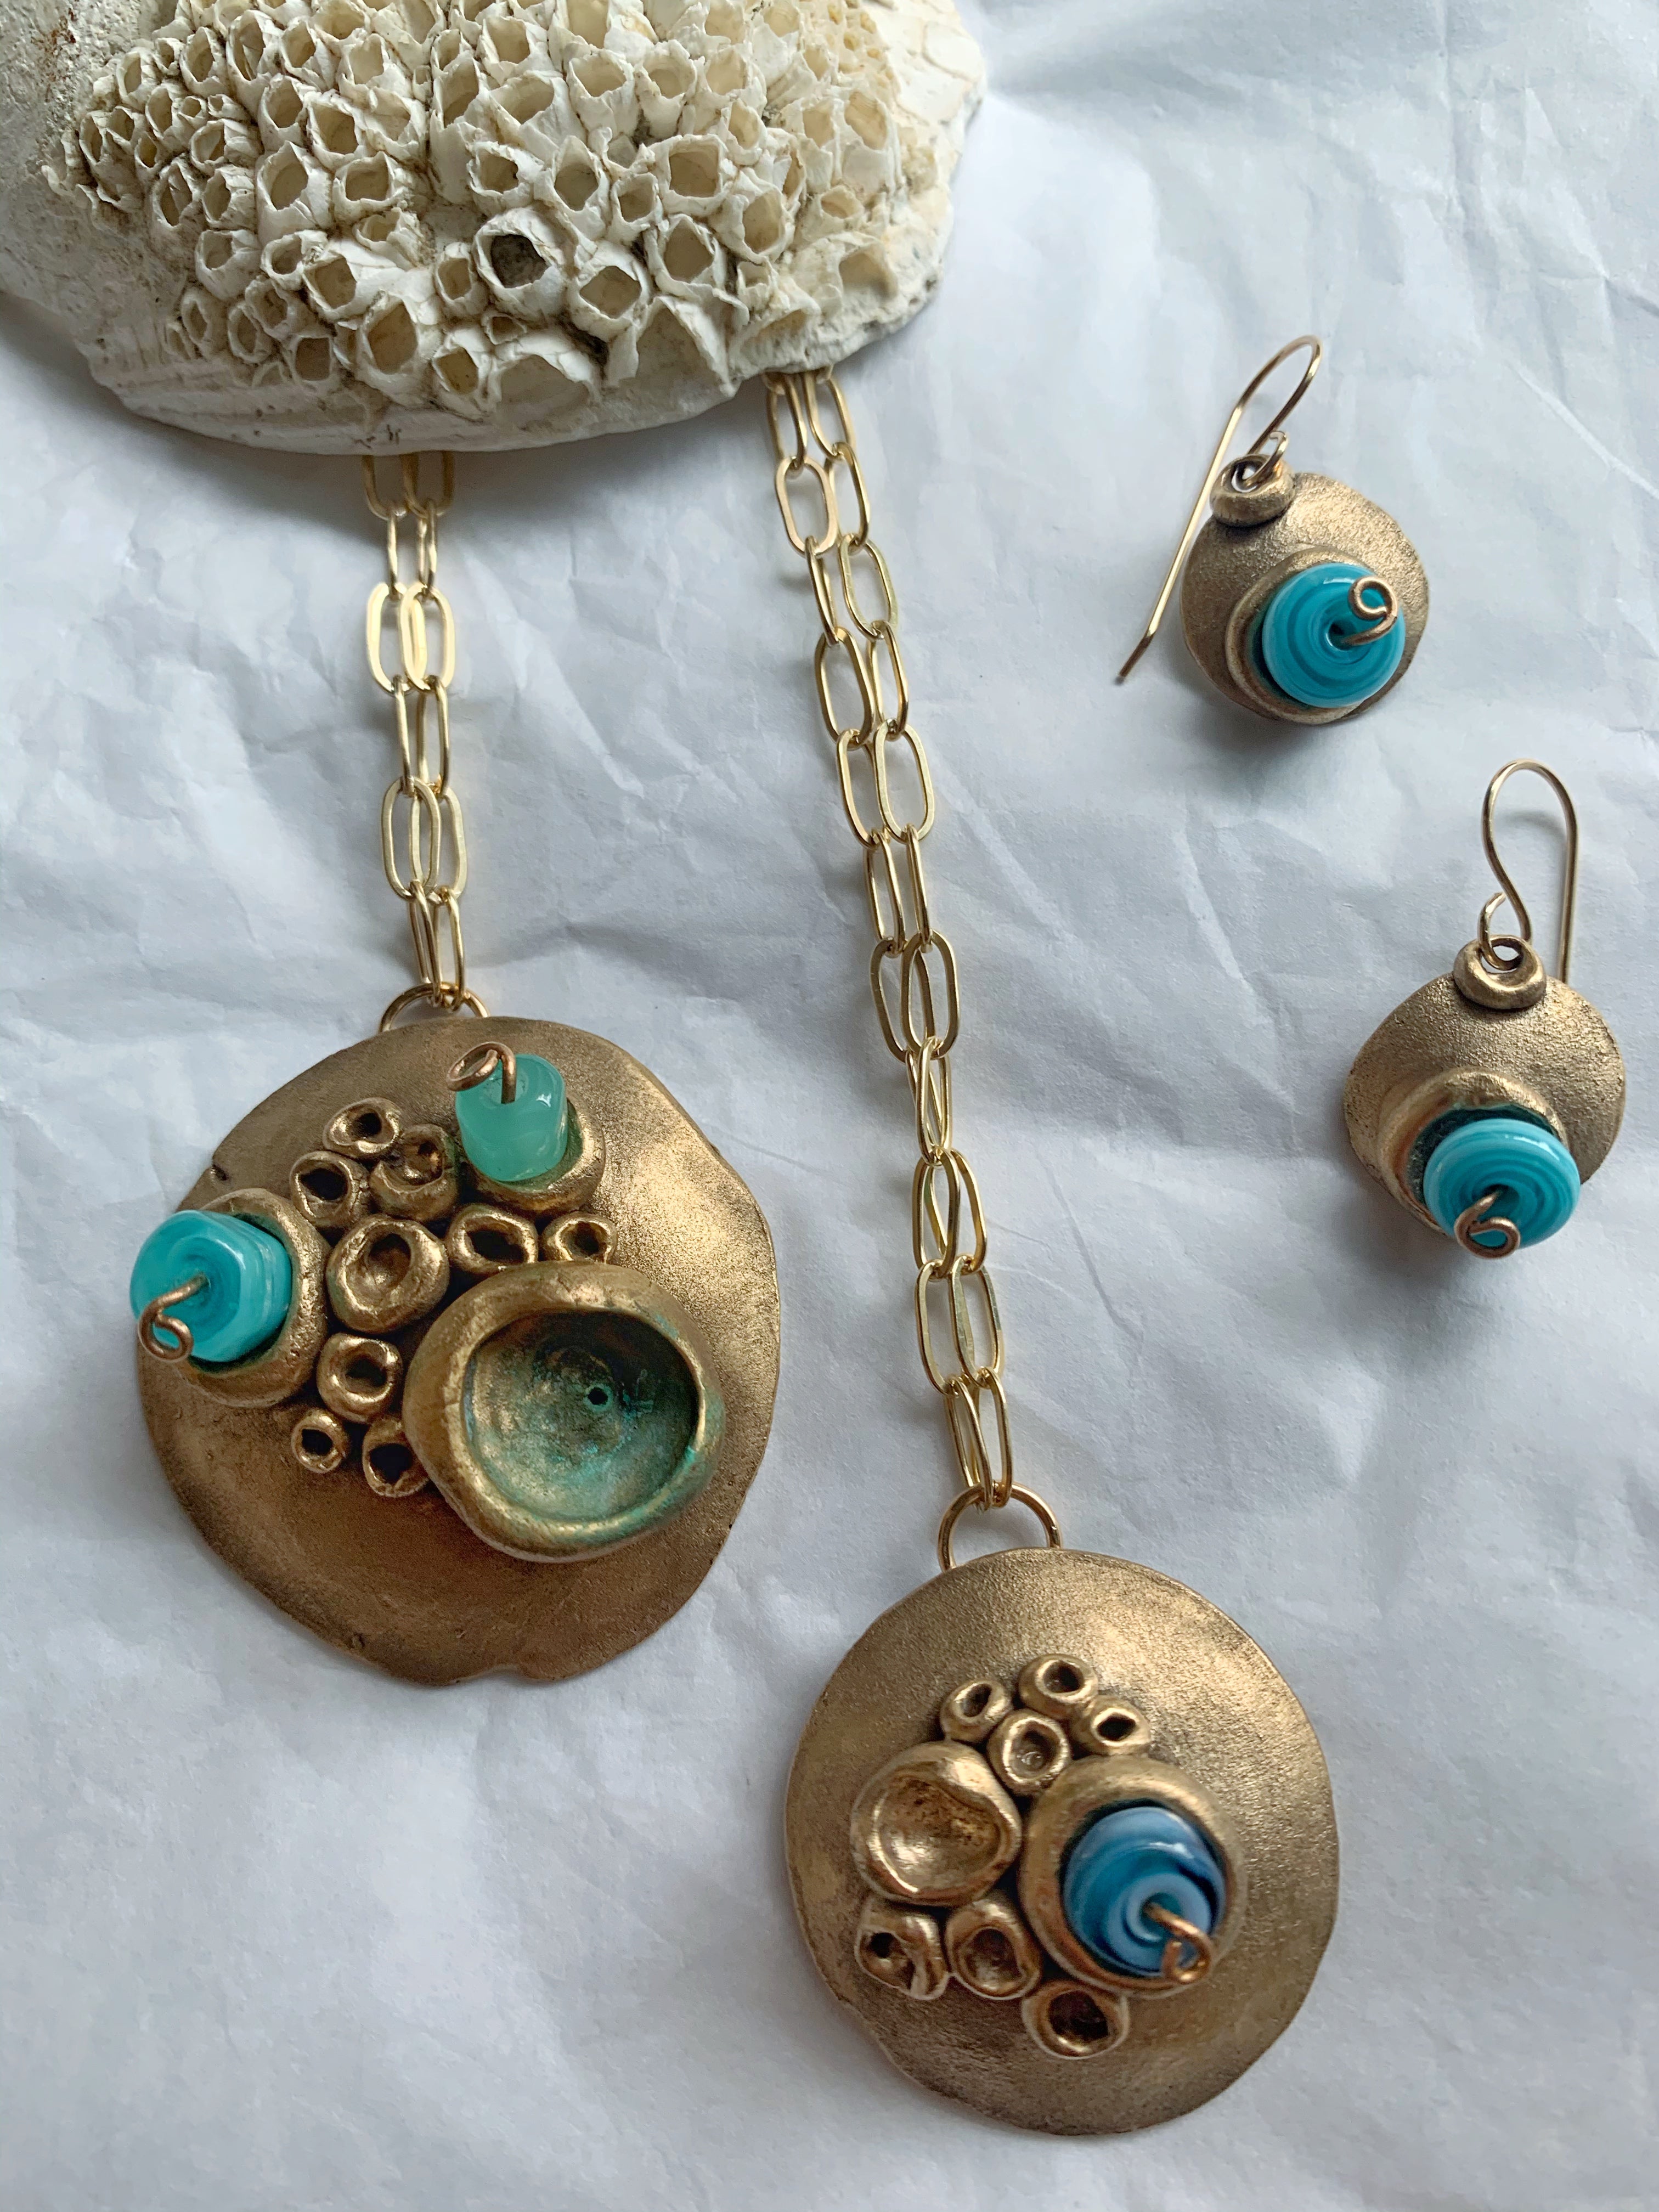 Artisan made bronze jewelry with blue glass beads